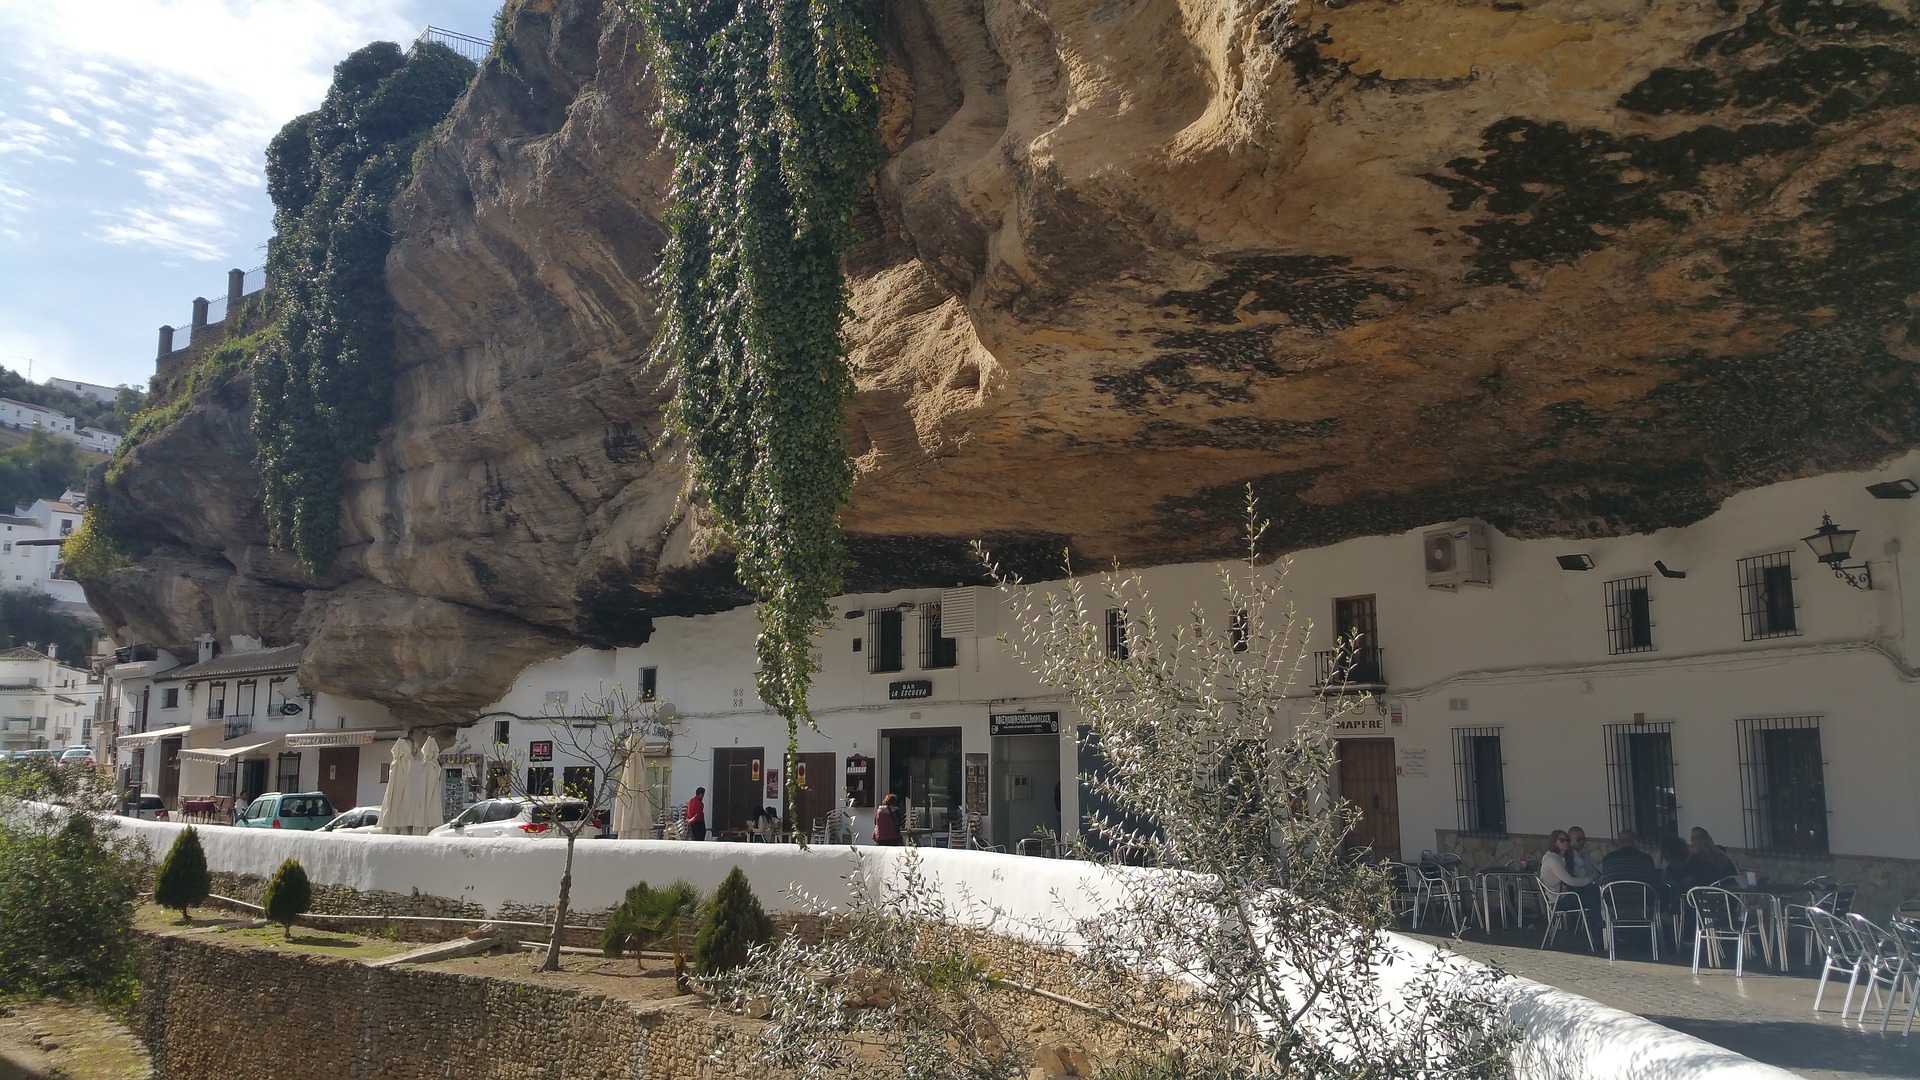 You are currently viewing Setenil de las Bodegas, The Town Built under the Rock in Spain